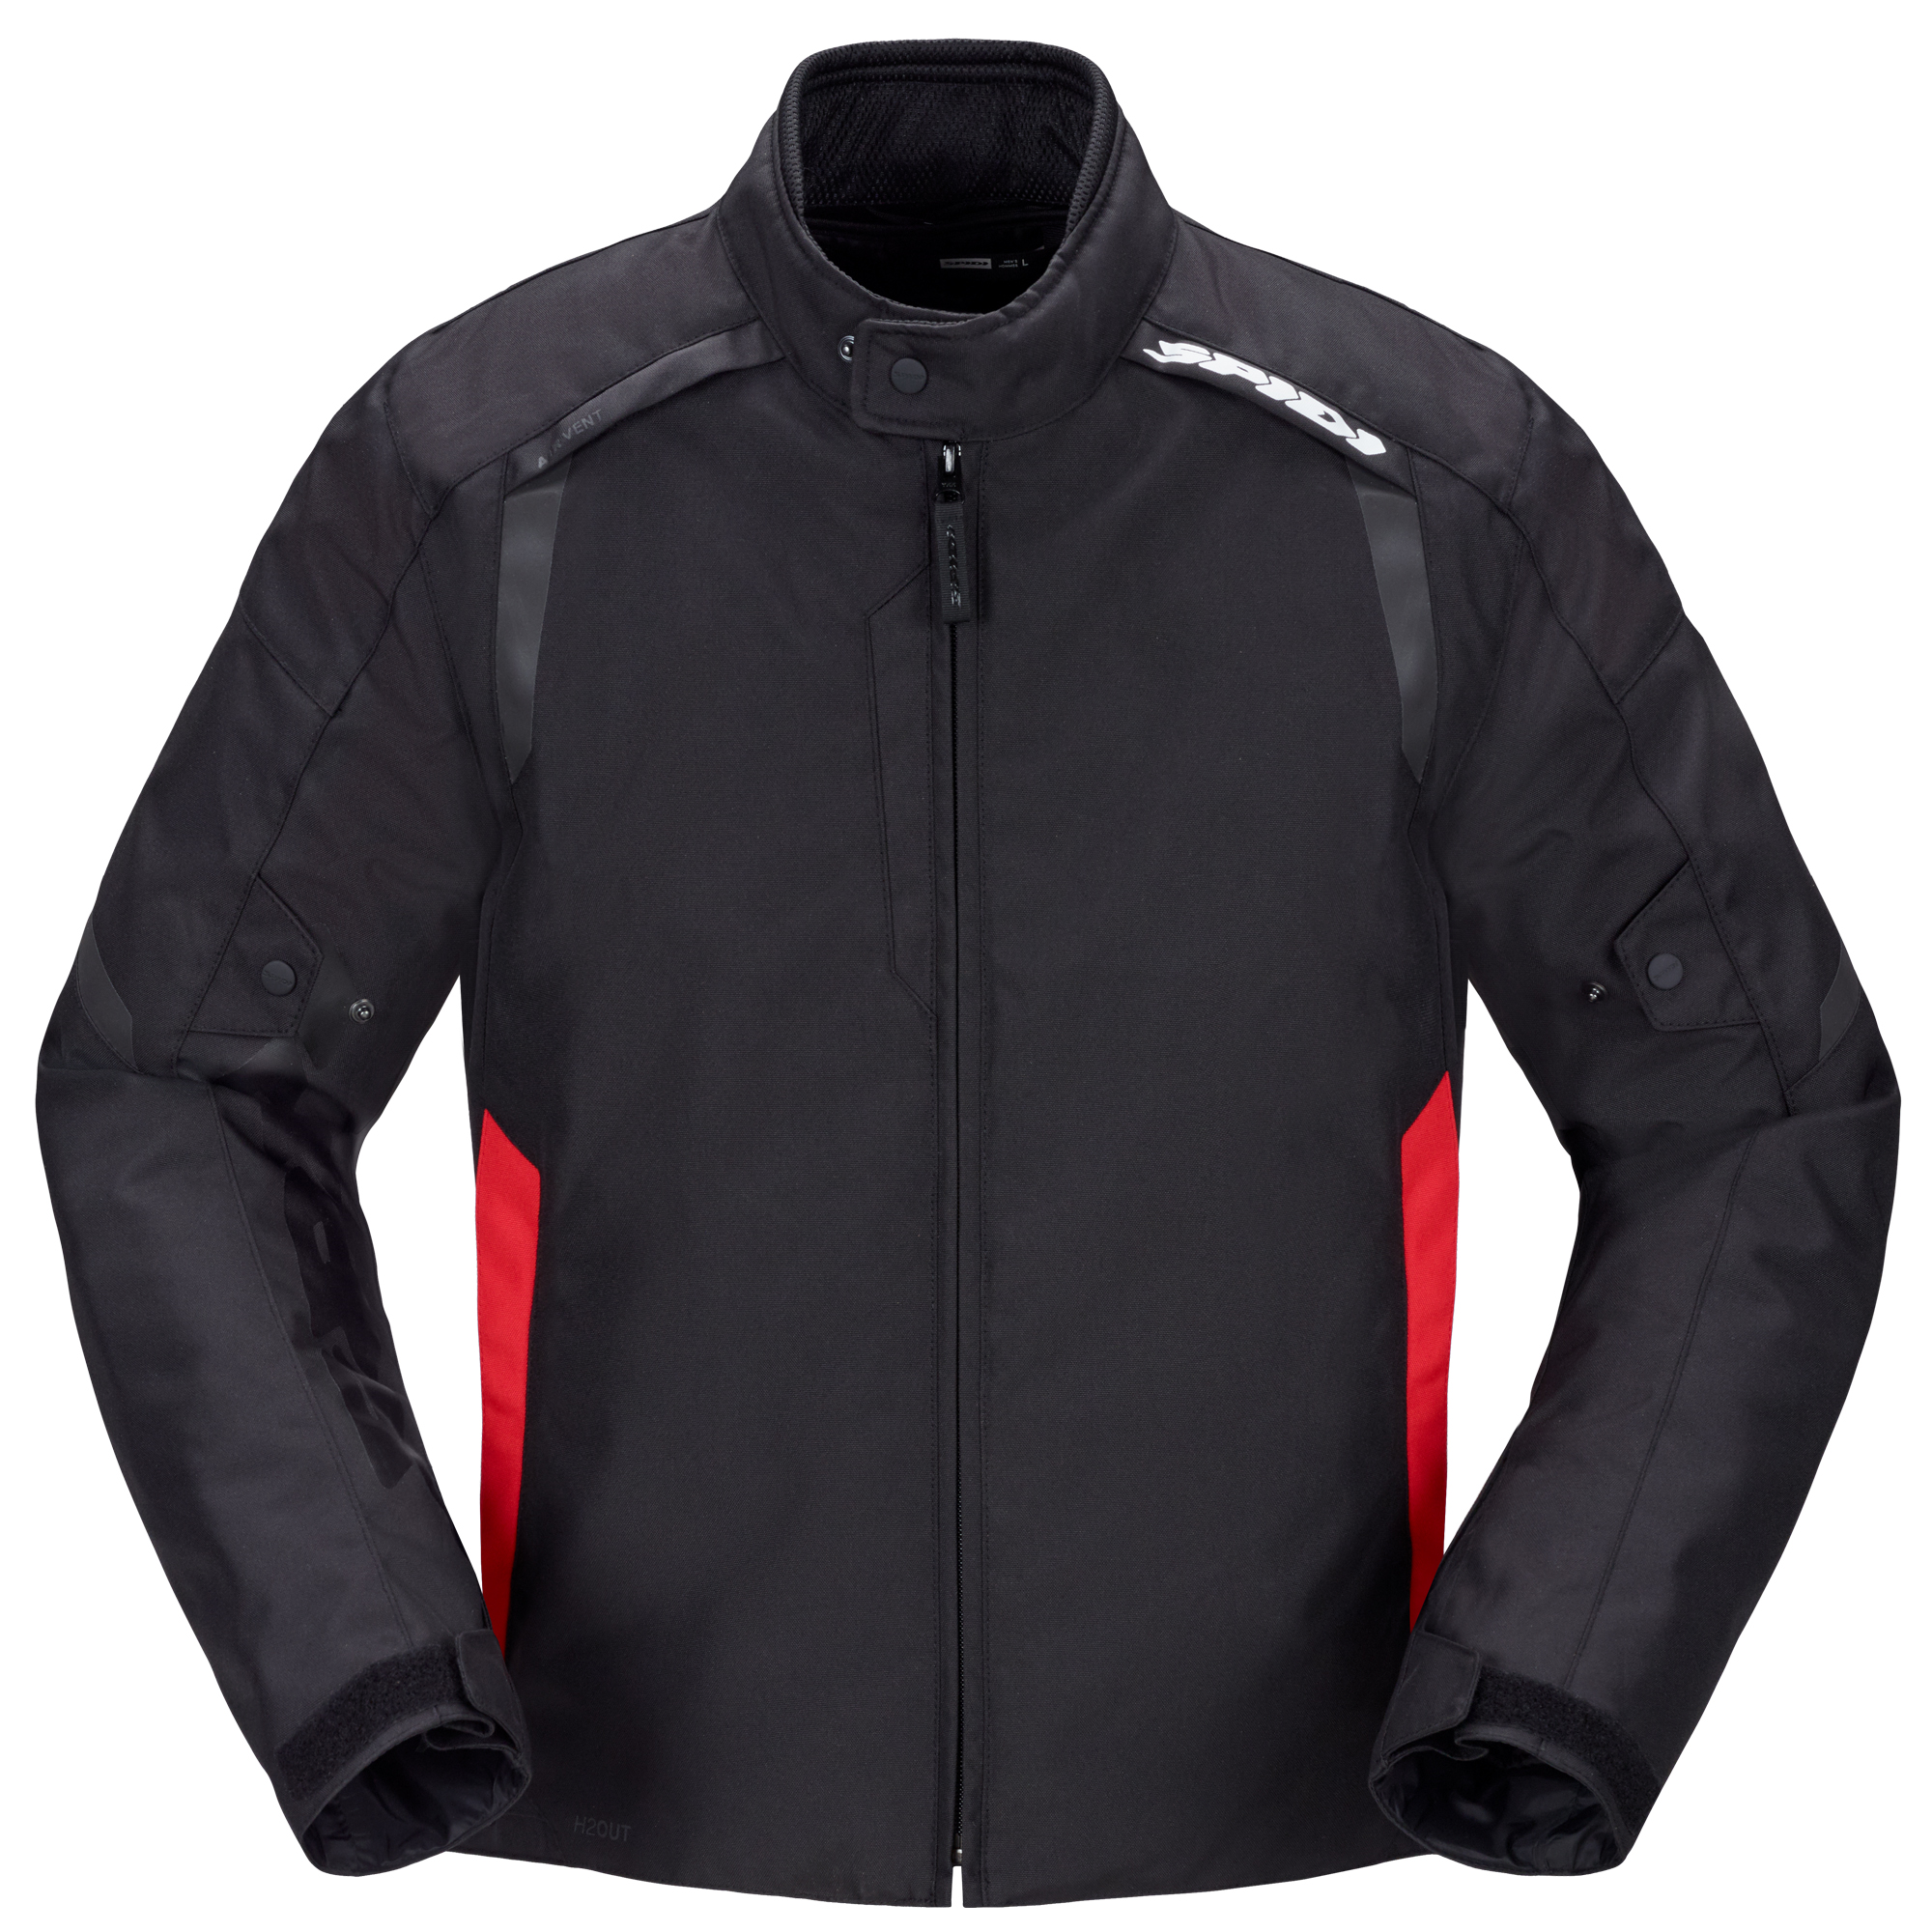 Image of Spidi Tek H2Out Jacket Black Red Size S ID 8030161460513